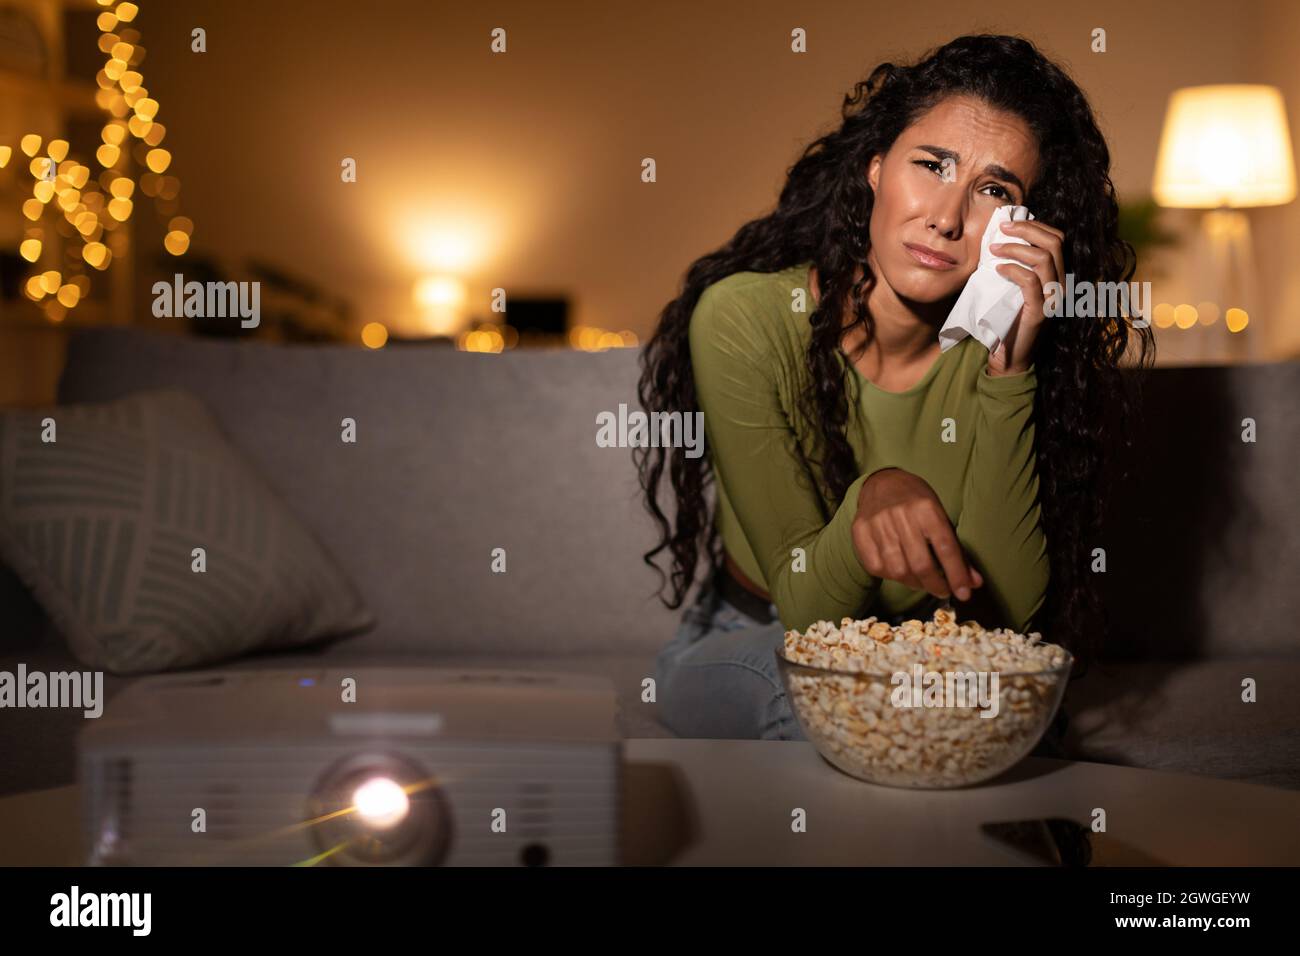 Woman Crying Watching Sad Movie On Domestic Cinema Projector And Wiping Tears Sitting On Sofa At Home At Night. Female Depression And Loneliness, Ment Stock Photo